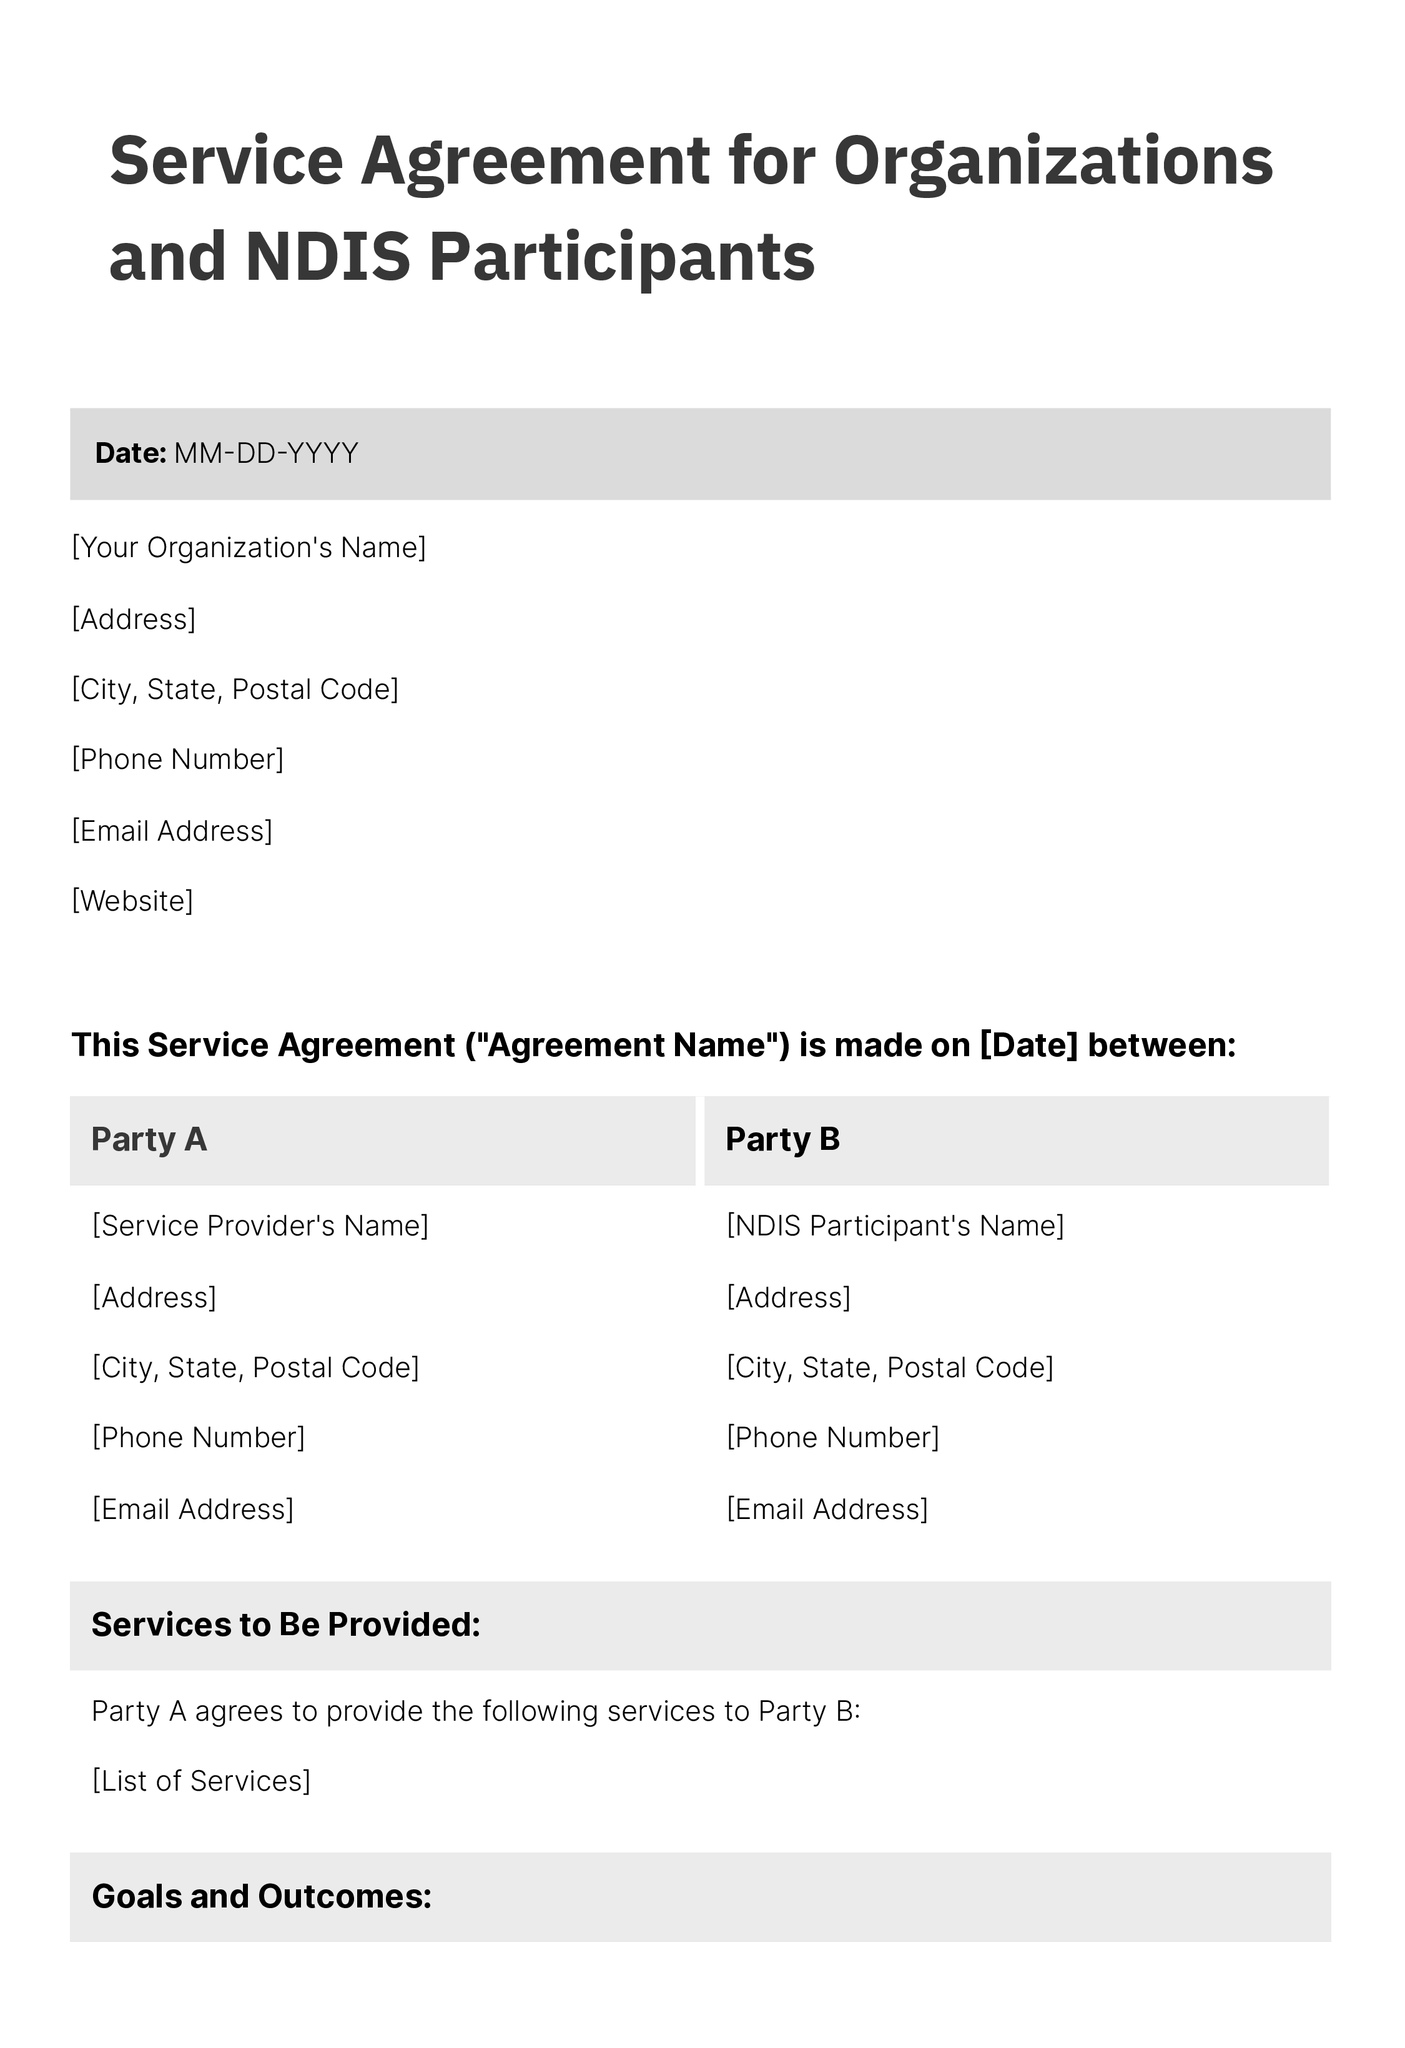 first page of service agreement template for organizations and NDIS participants